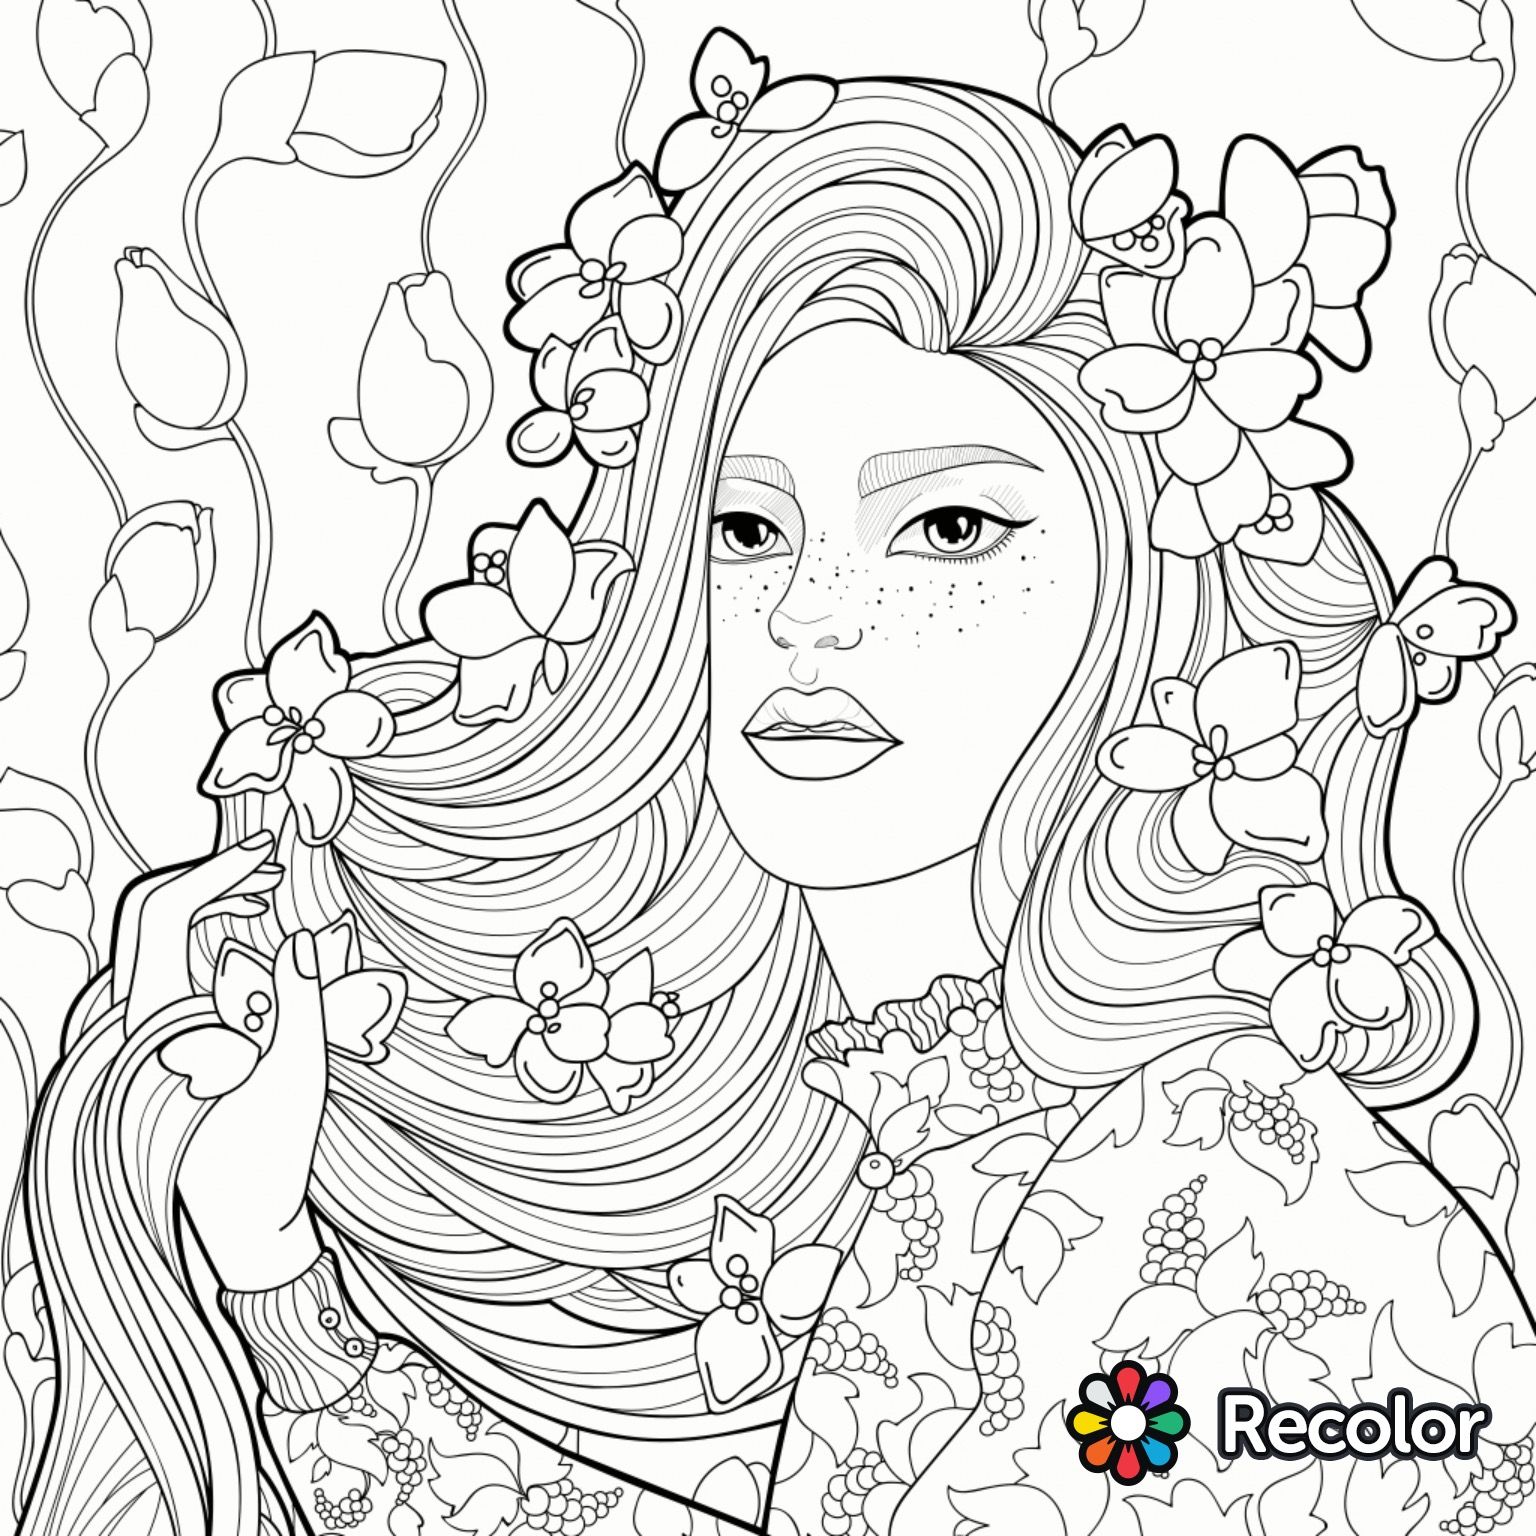 Coloring Pages : Pretty Girlg Pages Cute Anime To Print For ...